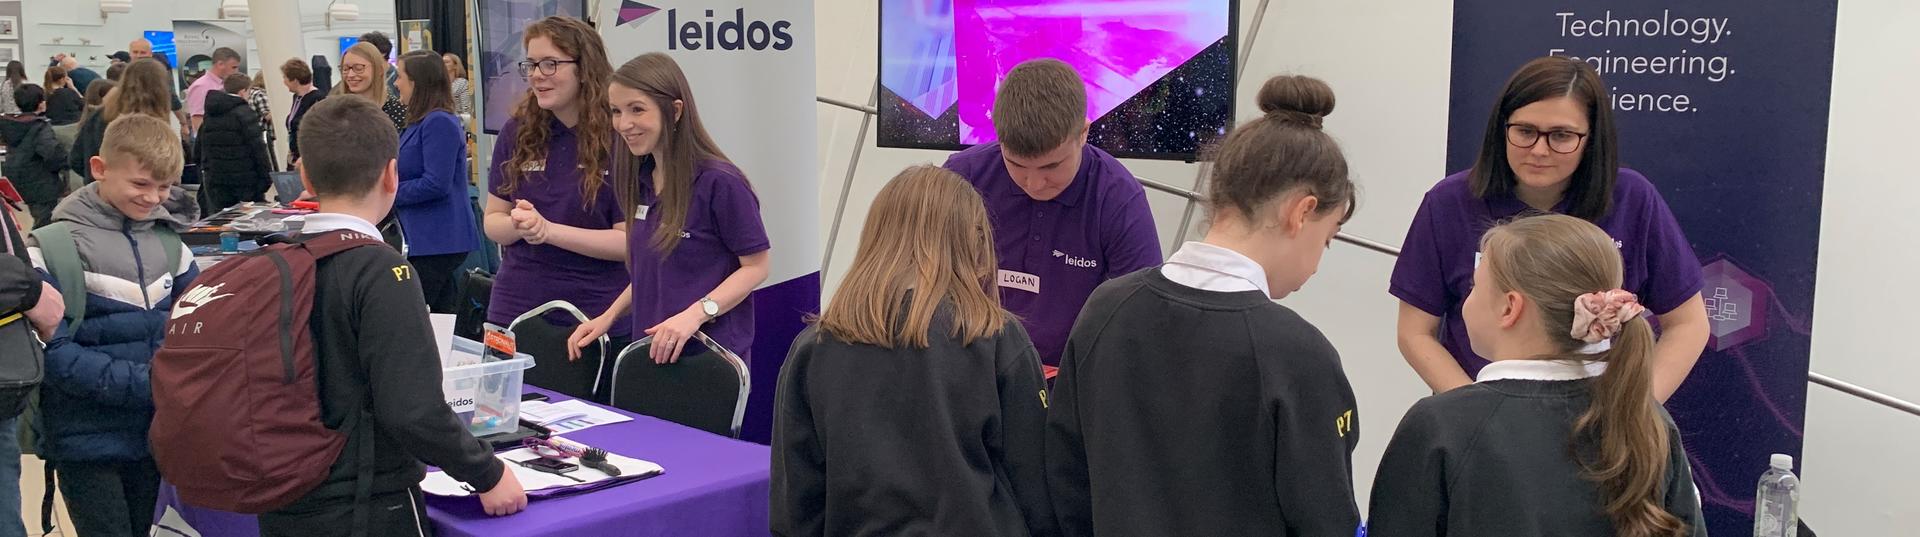 Leidos Stand at STEM event with school kids